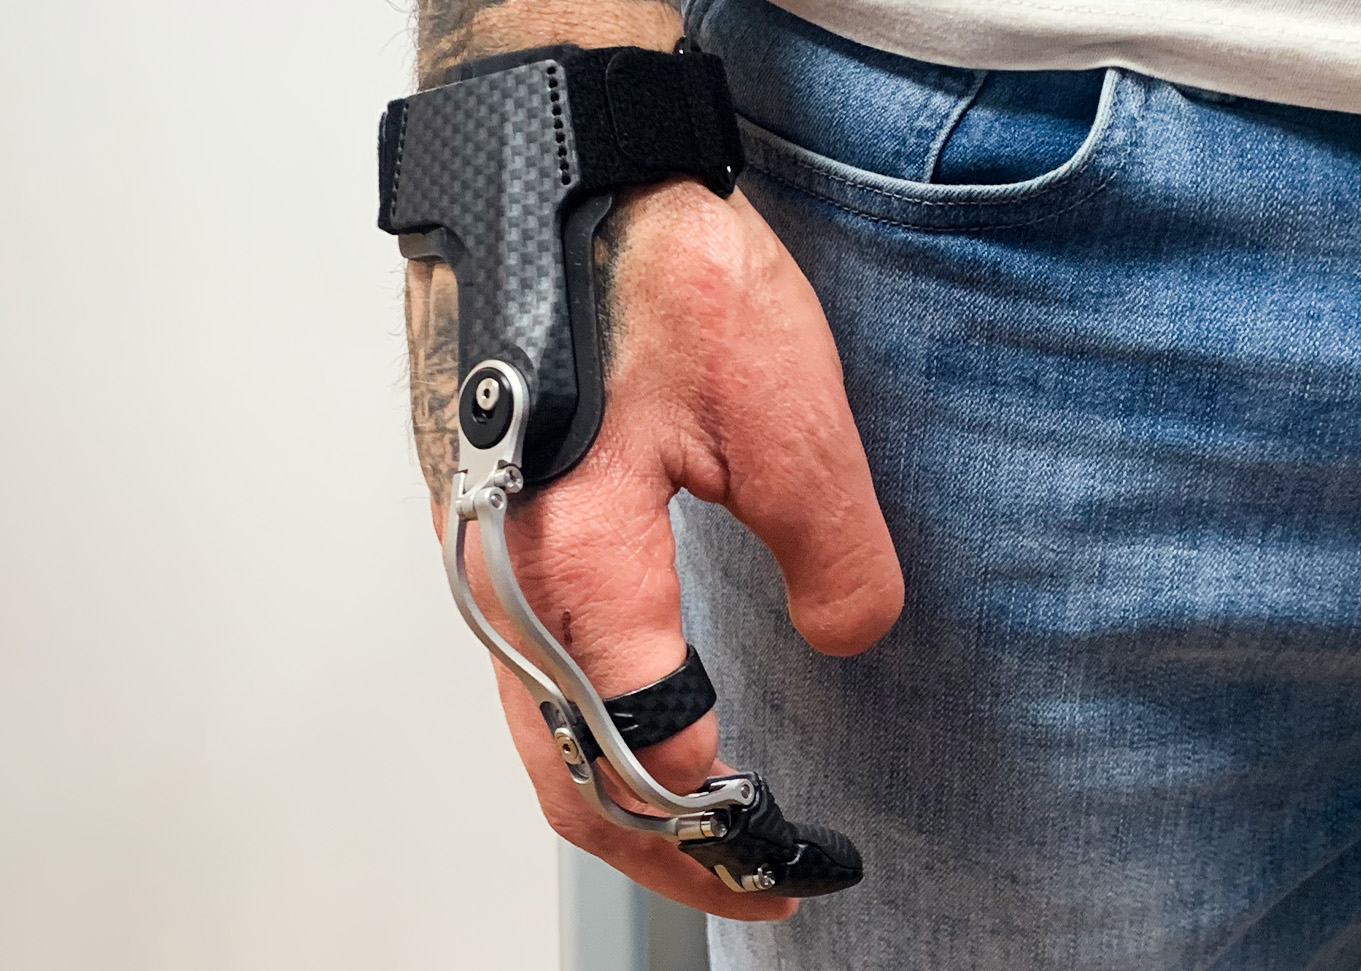 Advanced Finger Prosthetics: Enhancing Mobility for Amputees